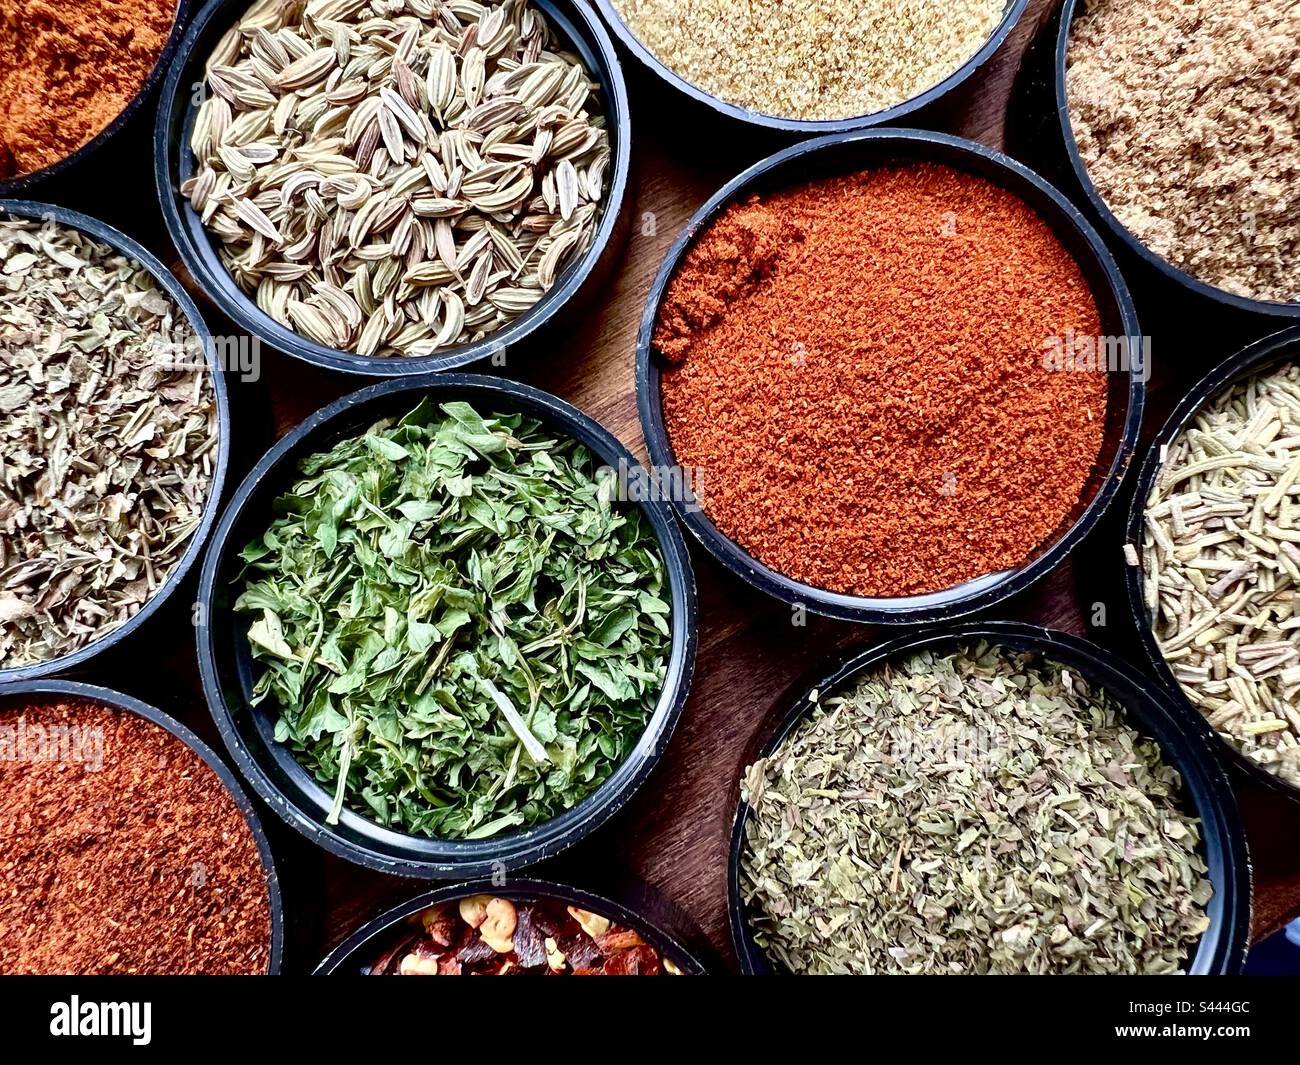 Herbs and spices from above Stock Photo